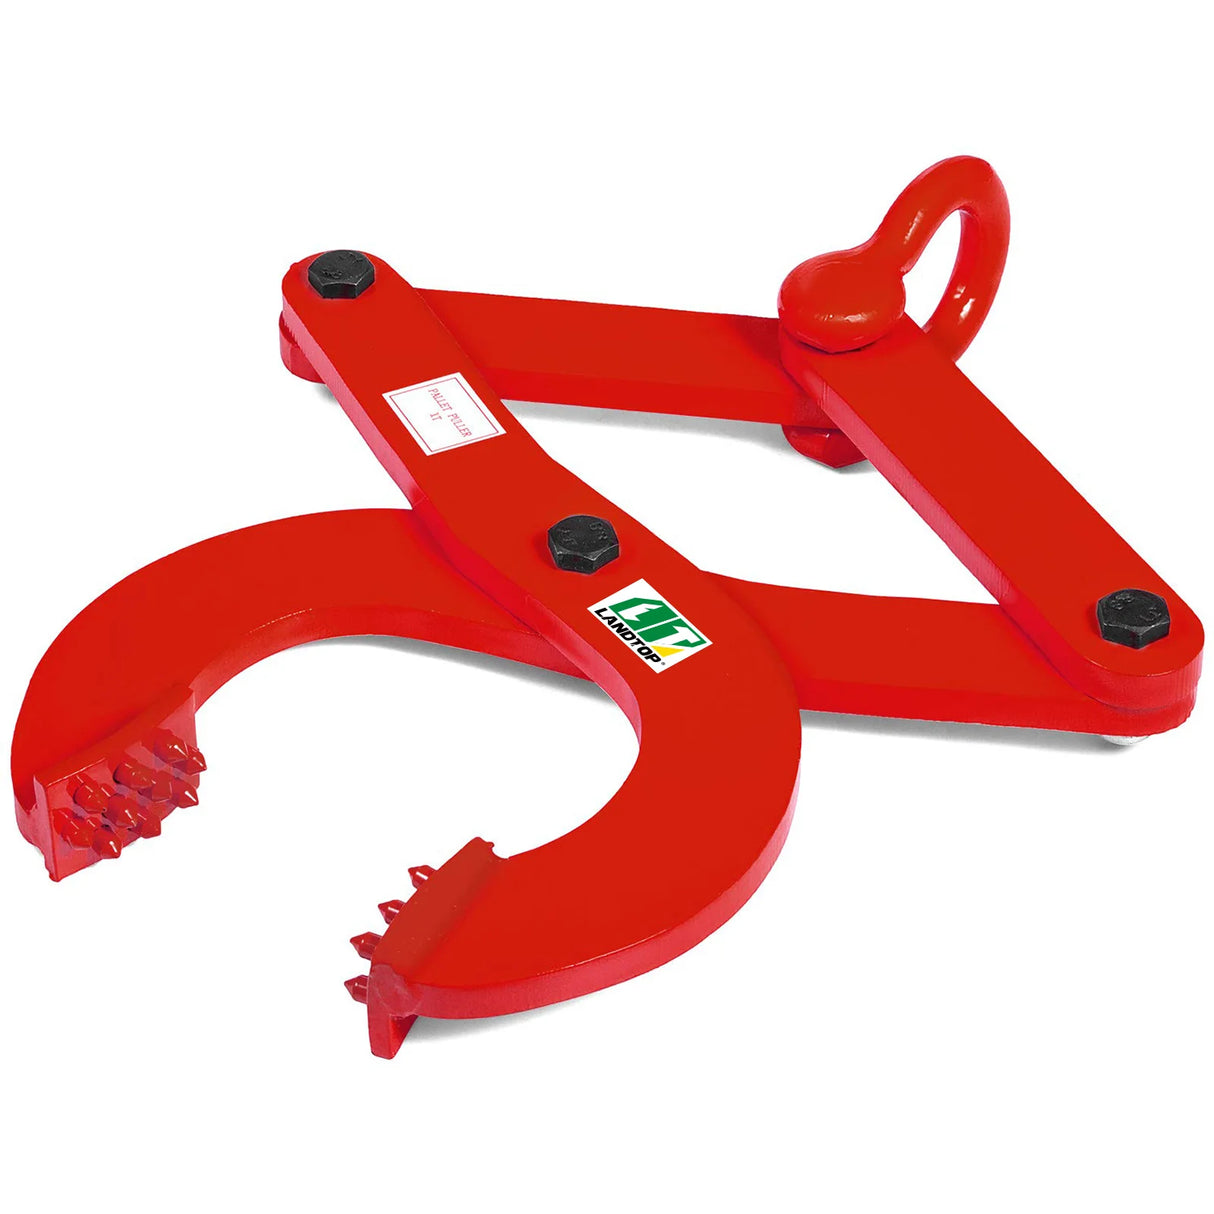 Pallet Puller, 1T/2205 LBS Heavy Duty Steel Single Scissor Yellow Clamp, 4.3 Inch Jaw Opening and 0.5 Inch Jaw Height, Hook Pulling Hoisting Tool for Forklift Chain, Red